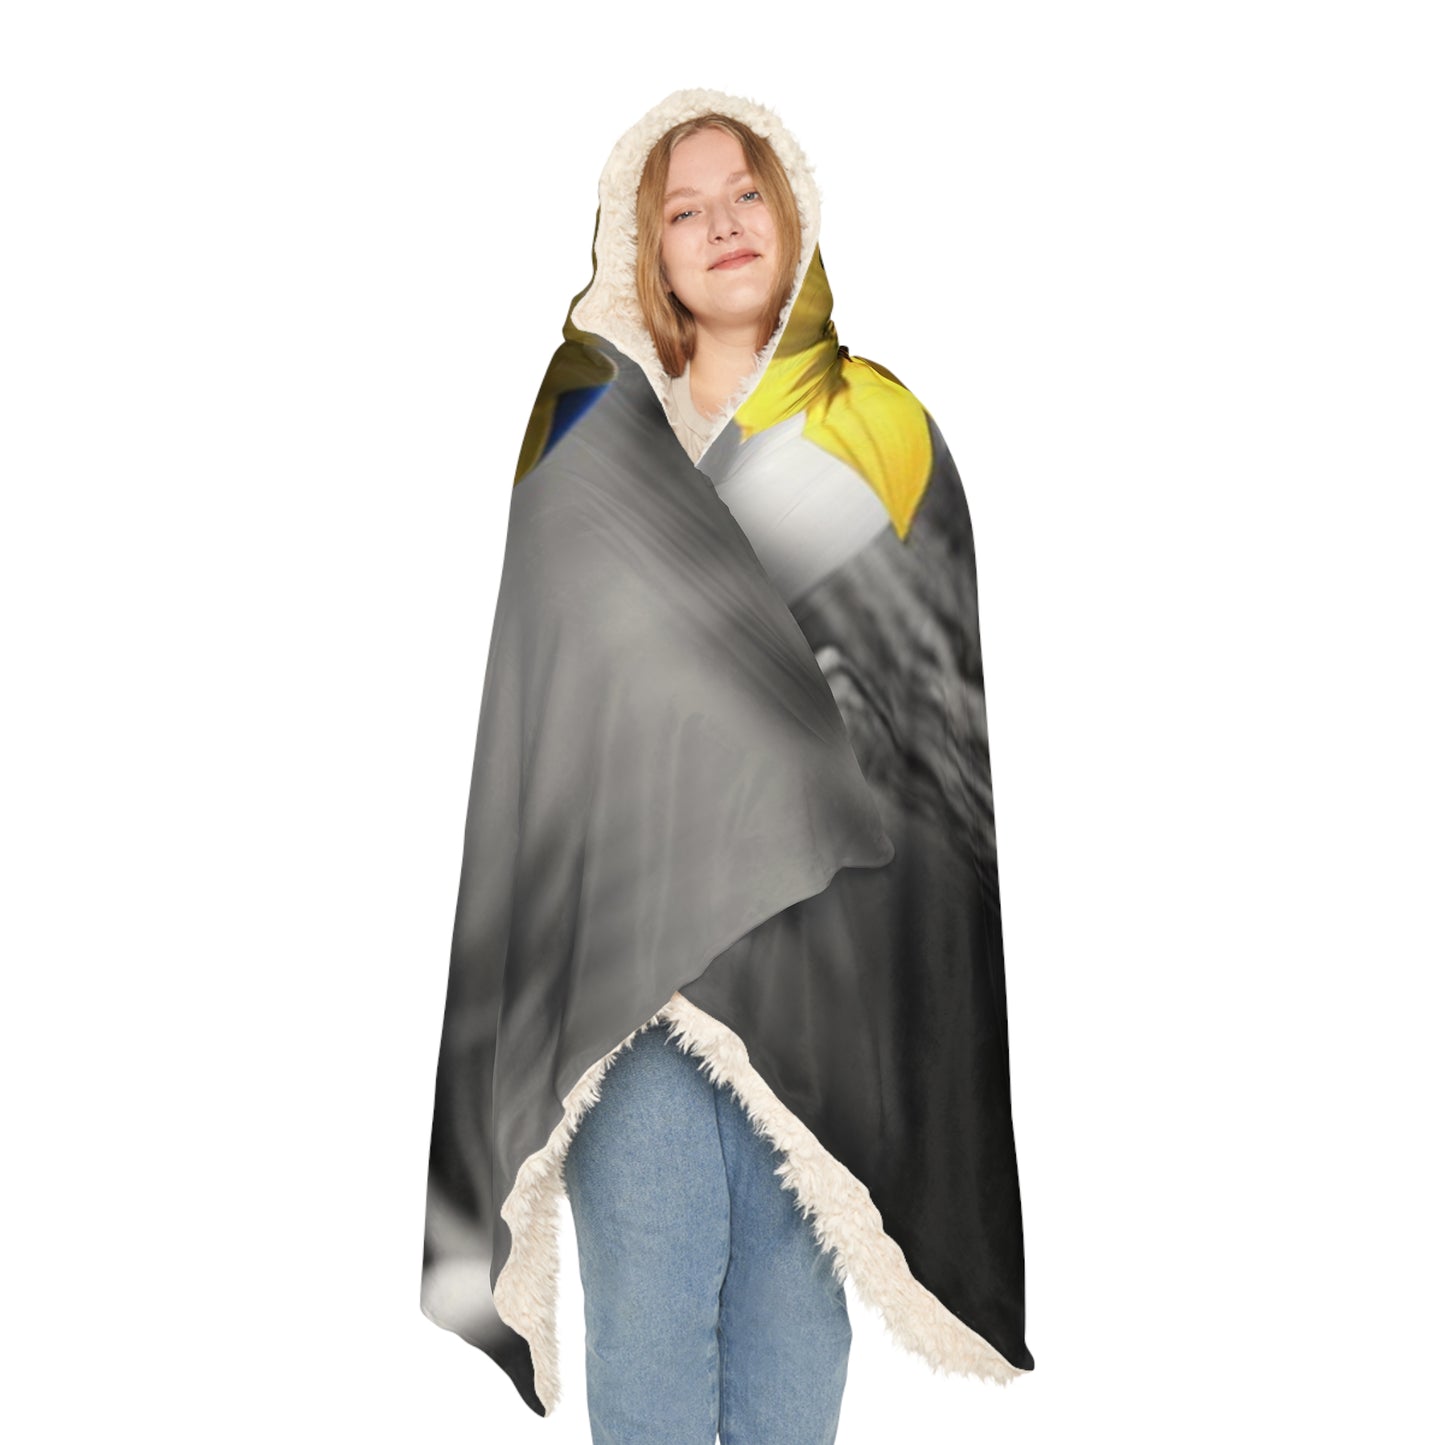 Snuggle Hooded Blanket Yellw Sunflower in a vase 3